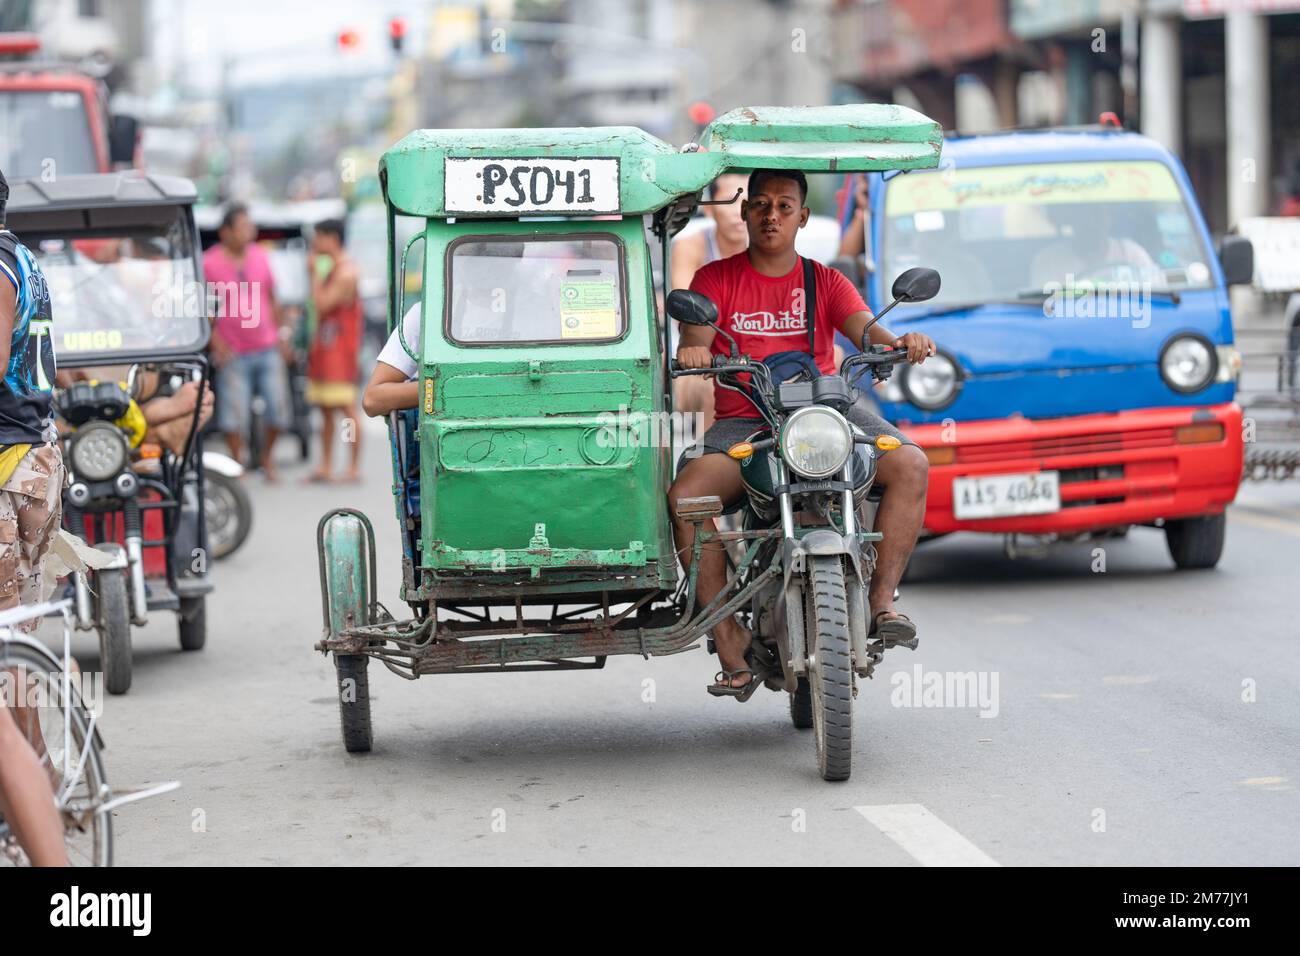 A man driving a motorised tricycle used as passenger transport, Cebu City, Philippines Stock Photo